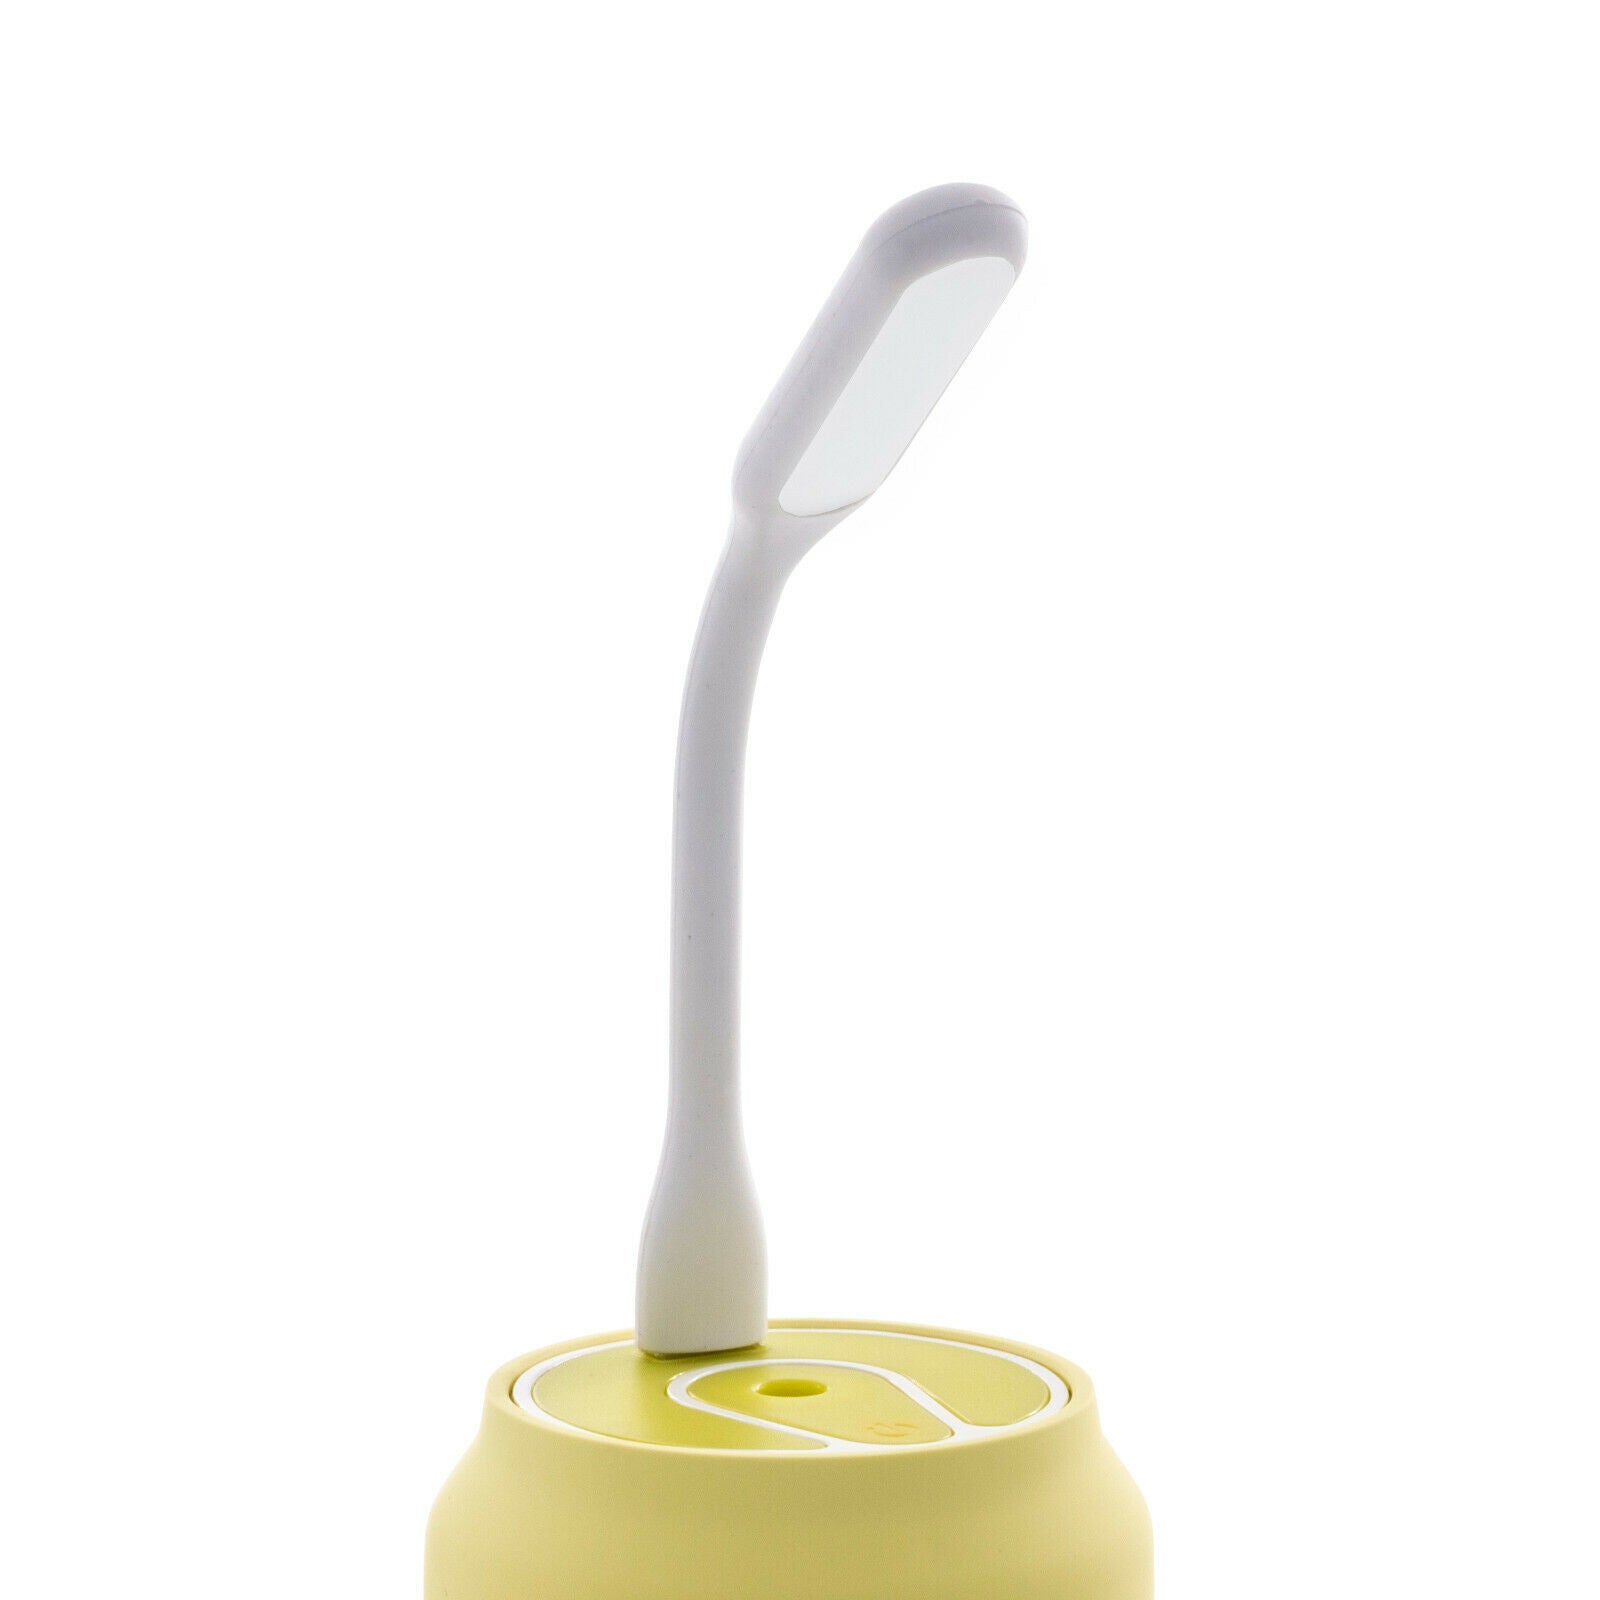 Cirago Humidifier 3in1 Portable Mist Humidifier with USB Fan, LED Light (Yellow)